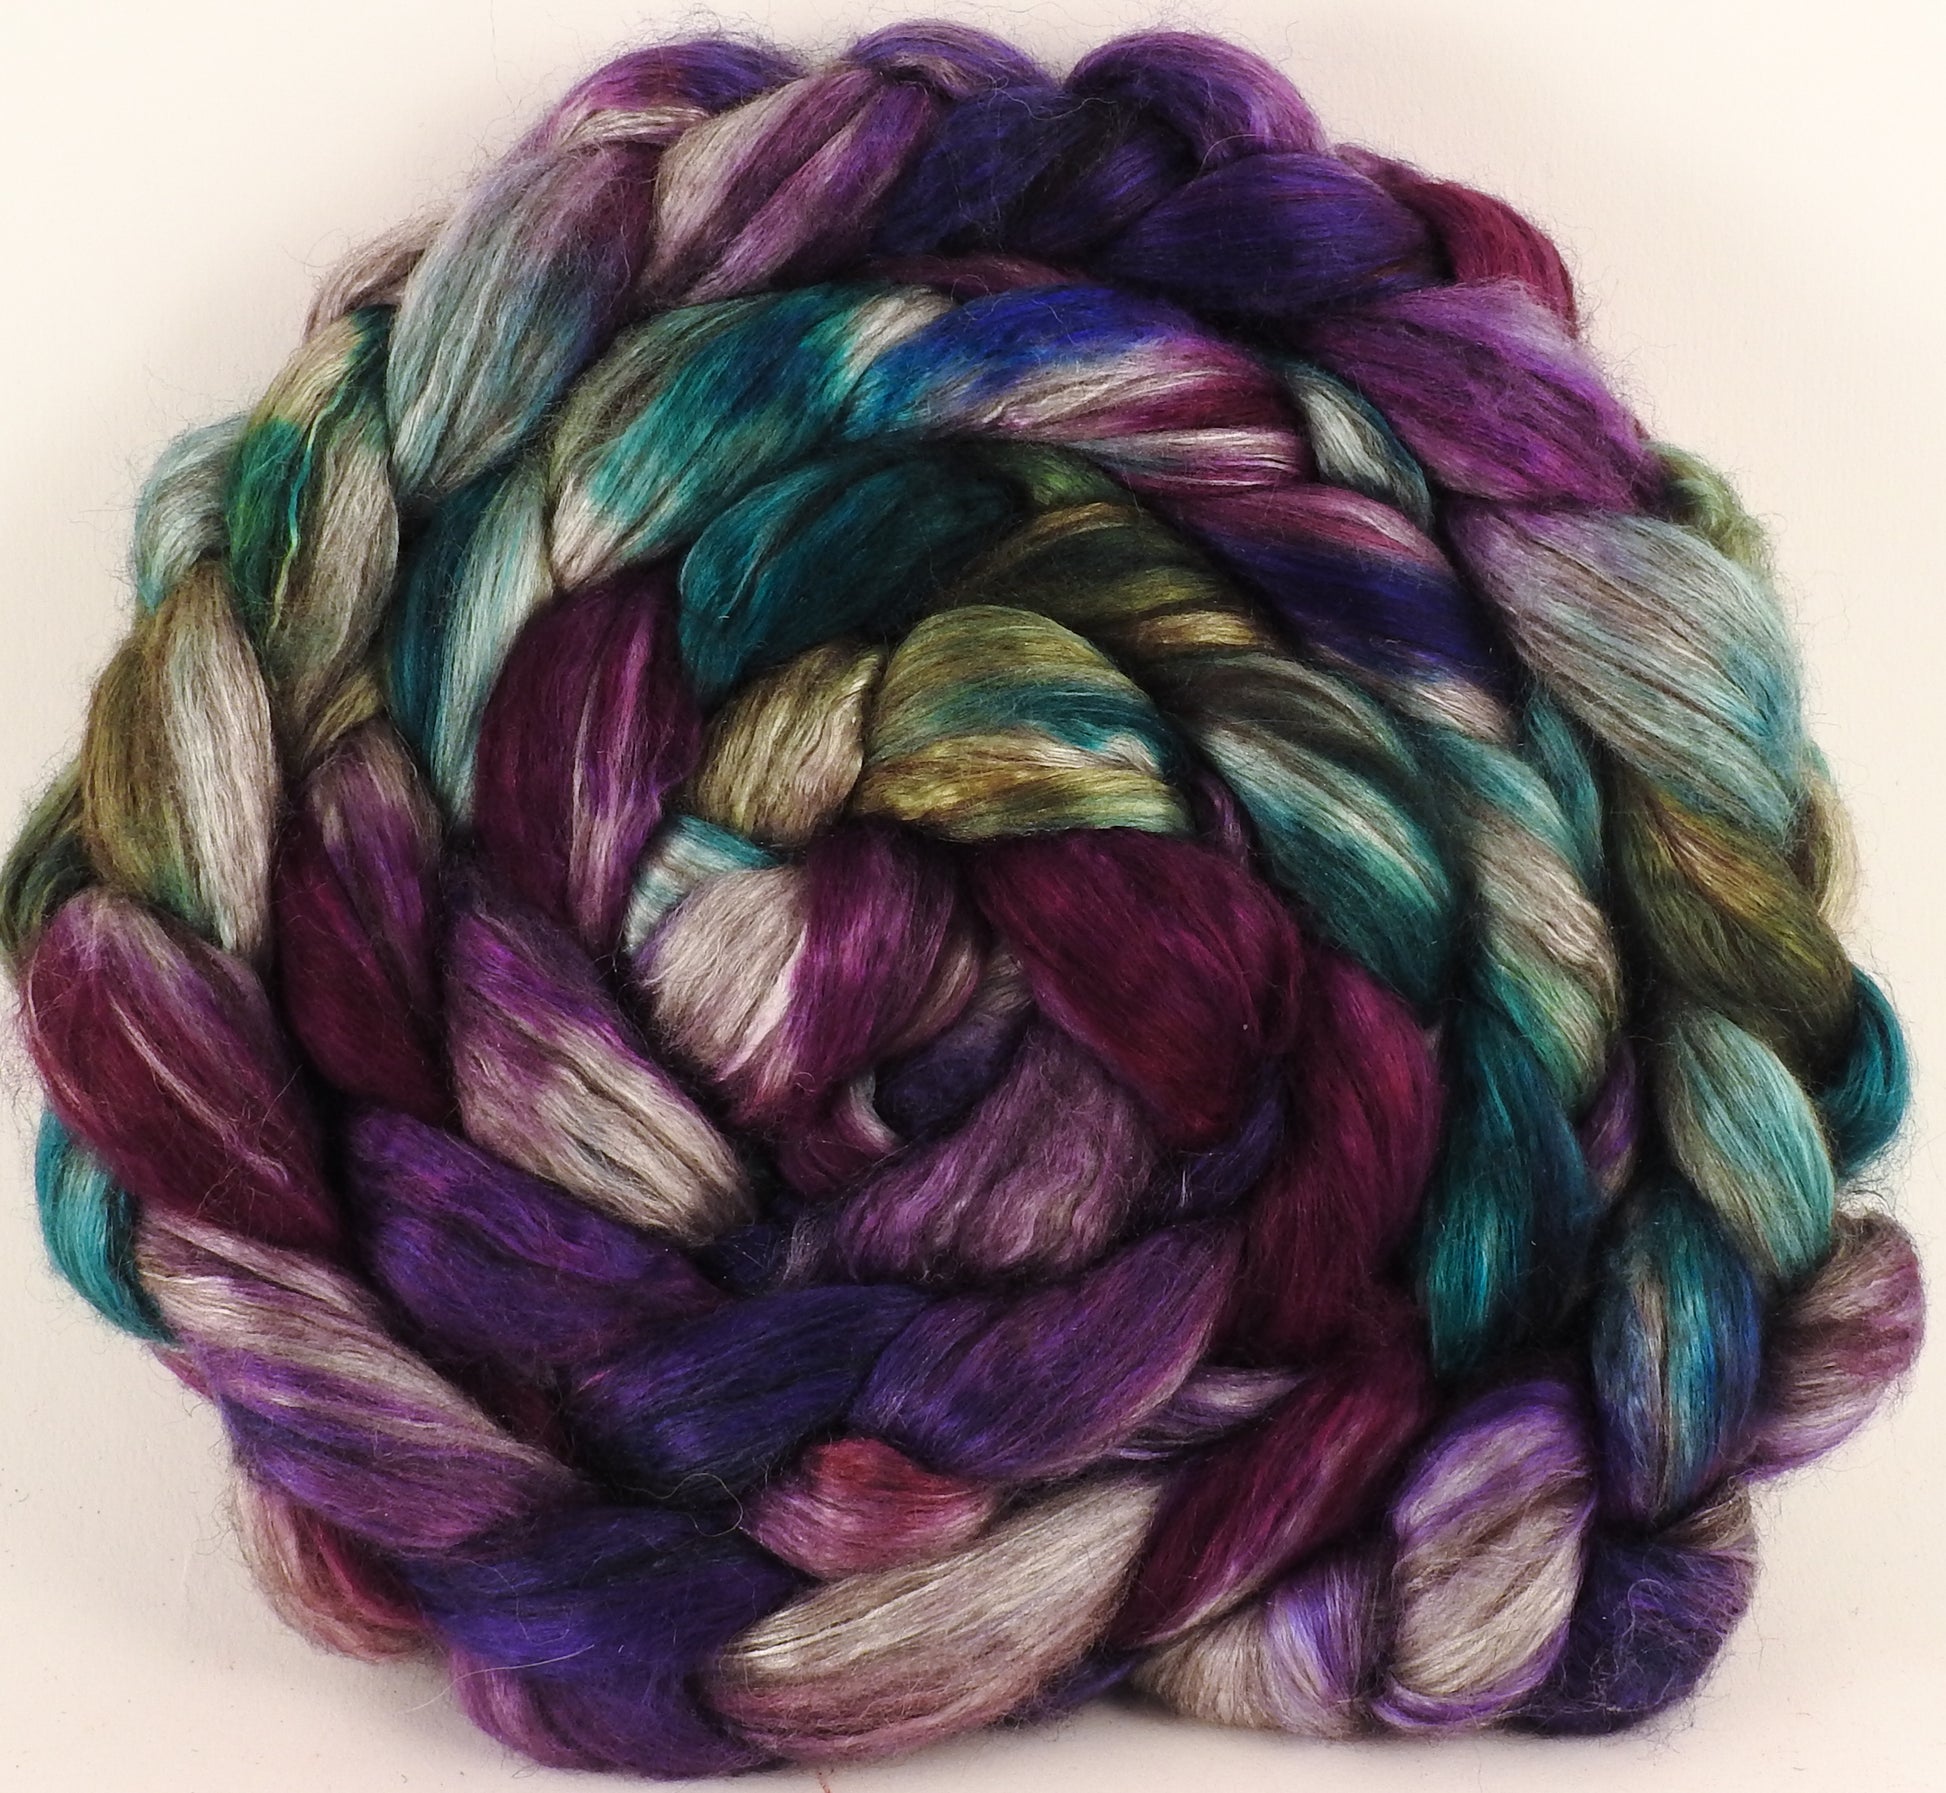 Hand dyed yak/ mulberry silk top - Mary, Mary, Quite Contrary (4.2 oz.) - YAK /silk ( 50/50) - Inglenook Fibers